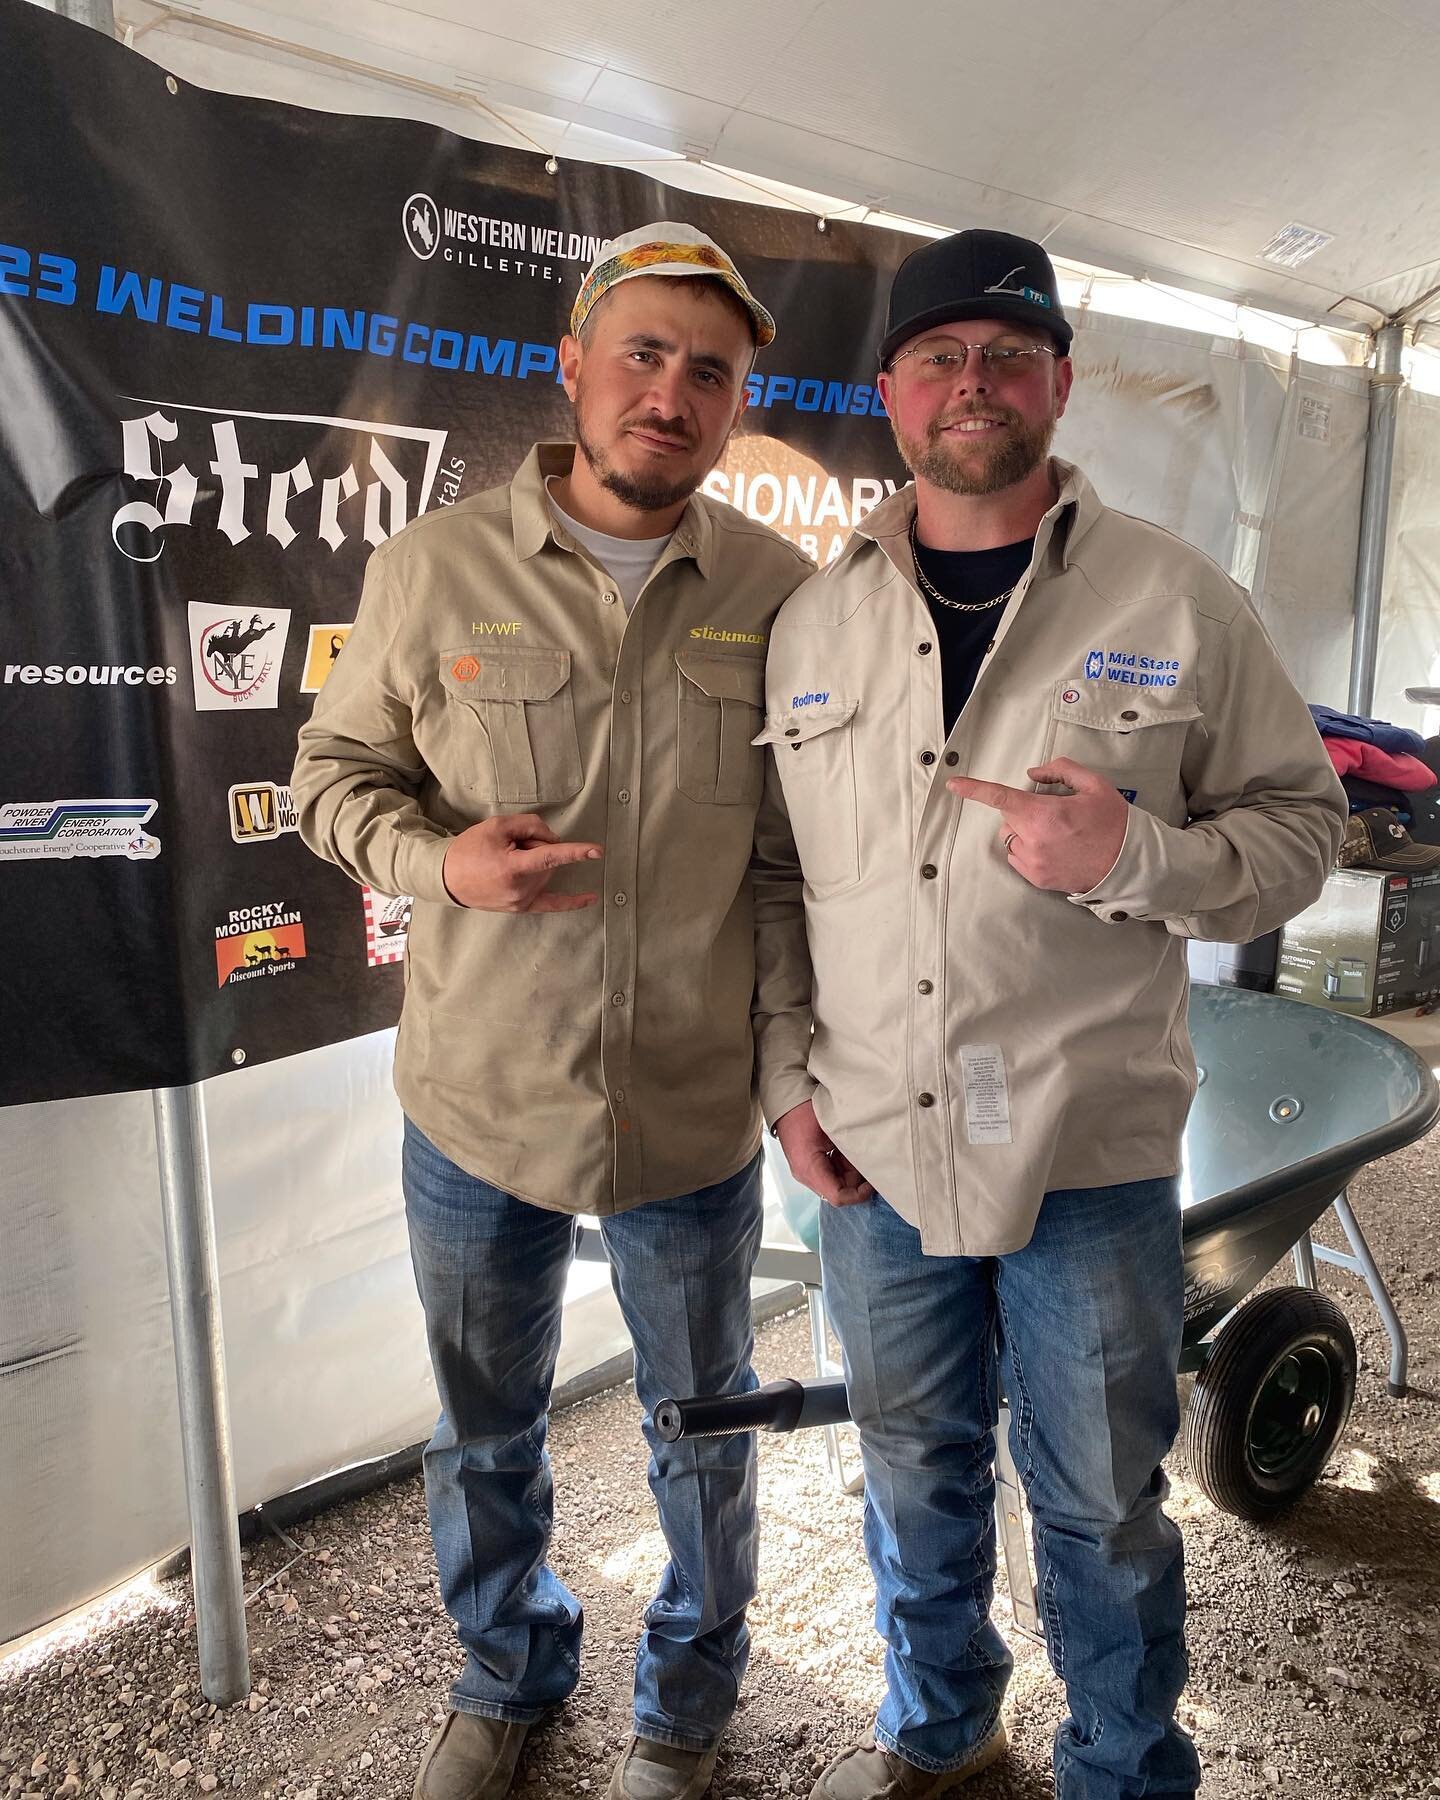 It was cool getting to meet @n8_da_gr8_ at the @westernweldingacademy comp! I always enjoy hearing others welding stories and and getting to share pipeline stories. Though I don&rsquo;t pipeline anymore I still miss the times of welding and laying pi